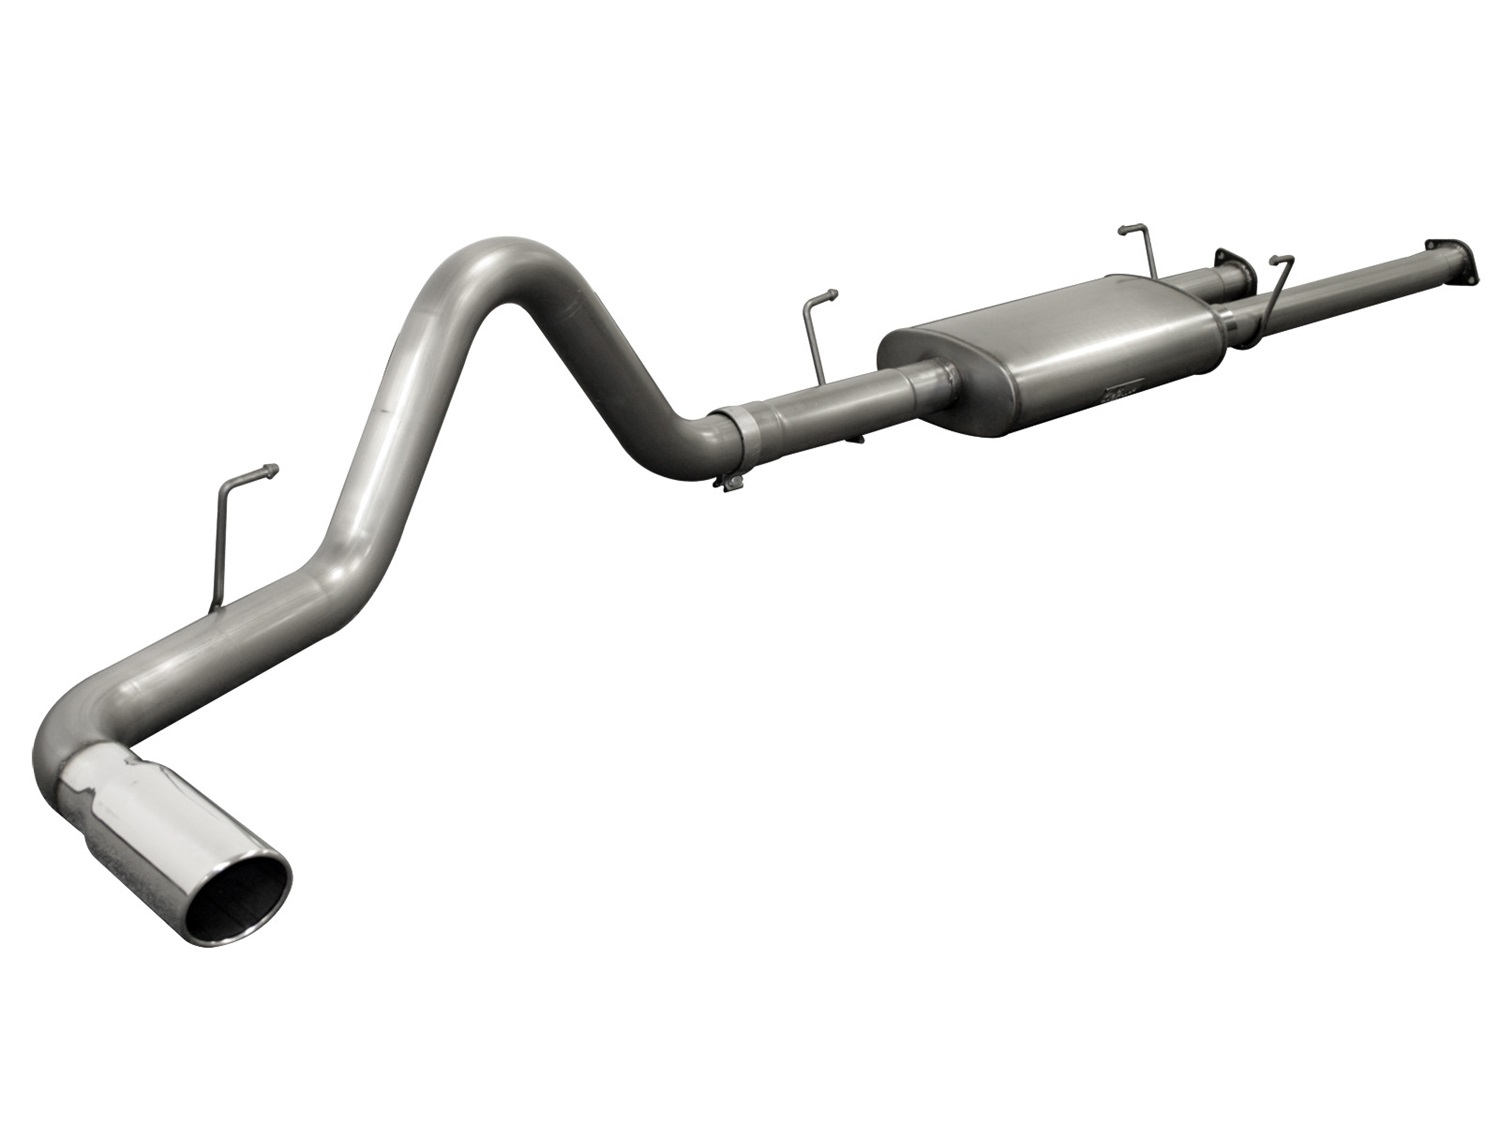 aFe Power aFe Power 49-46008 MACHForce XP Exhaust System Fits 10-14 Tundra